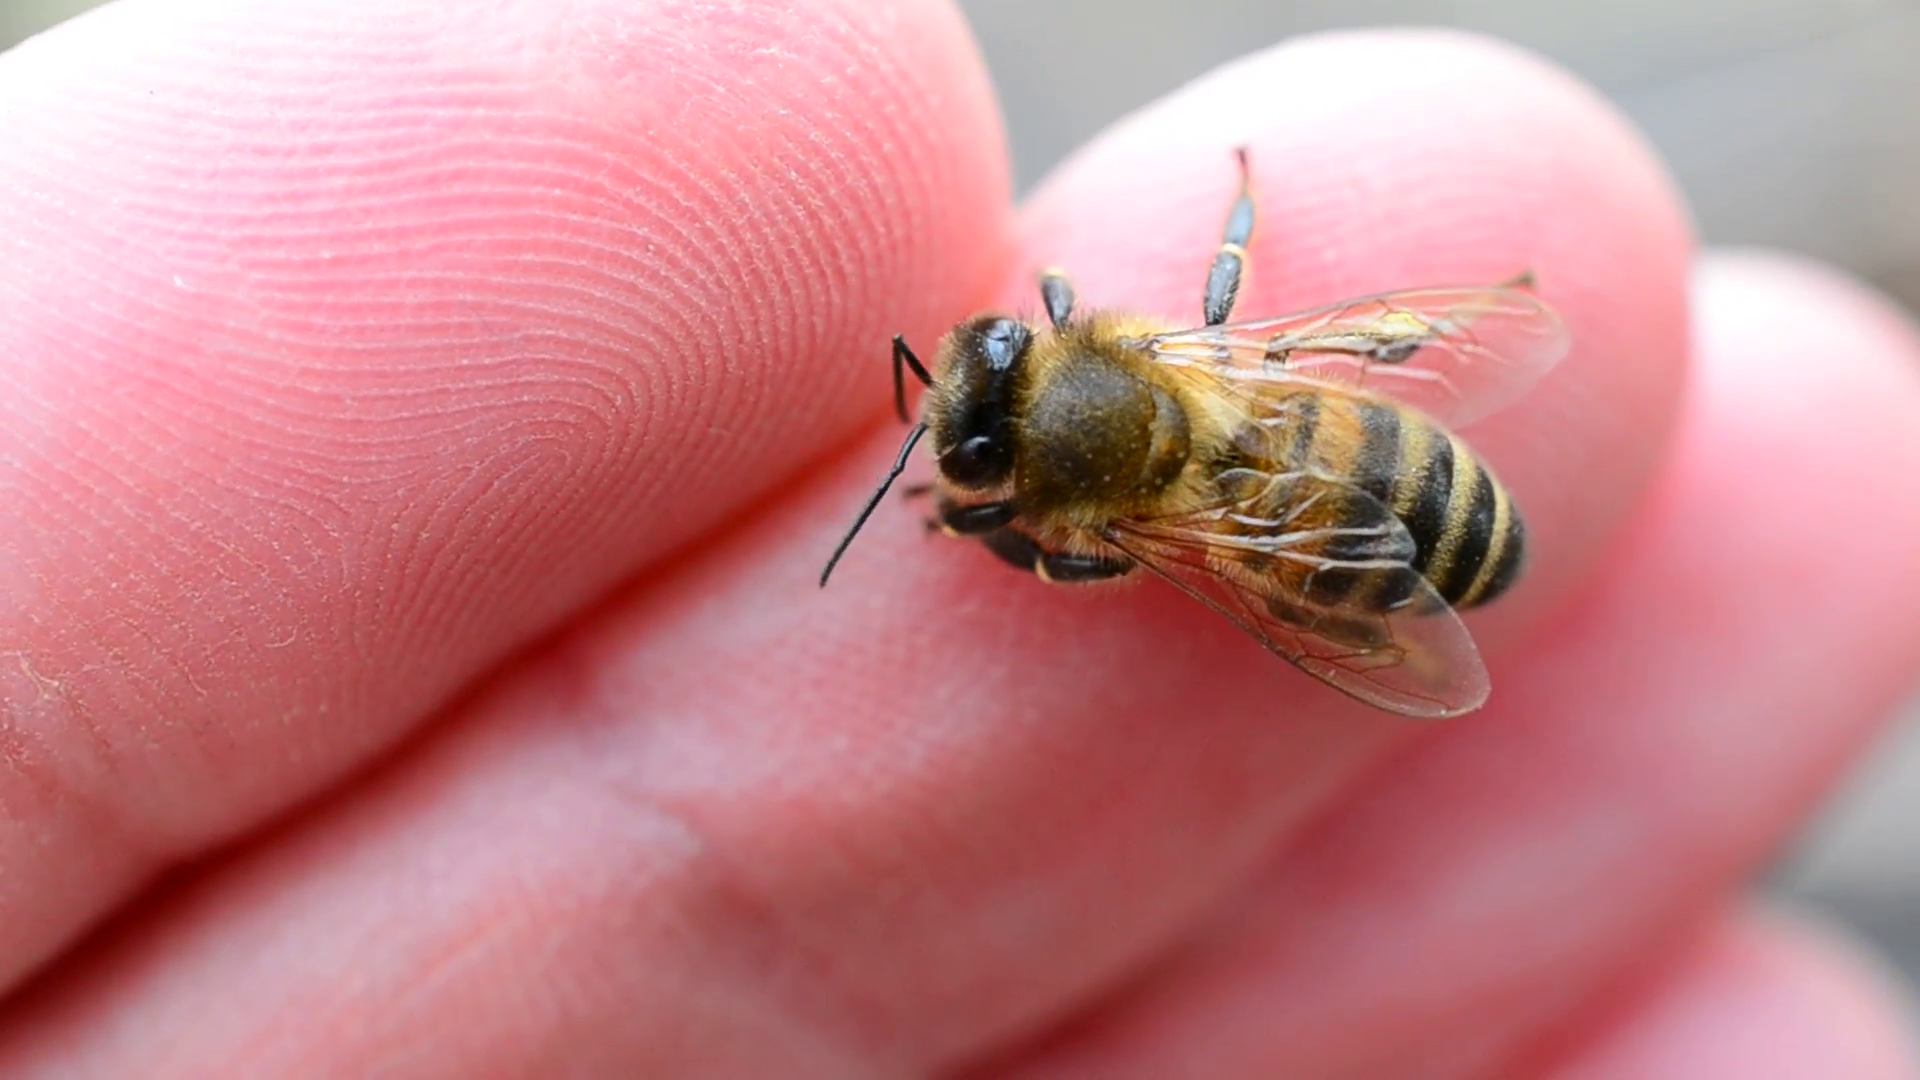 Closeup of worker bee sitting on human finger of a Caucasian person ...